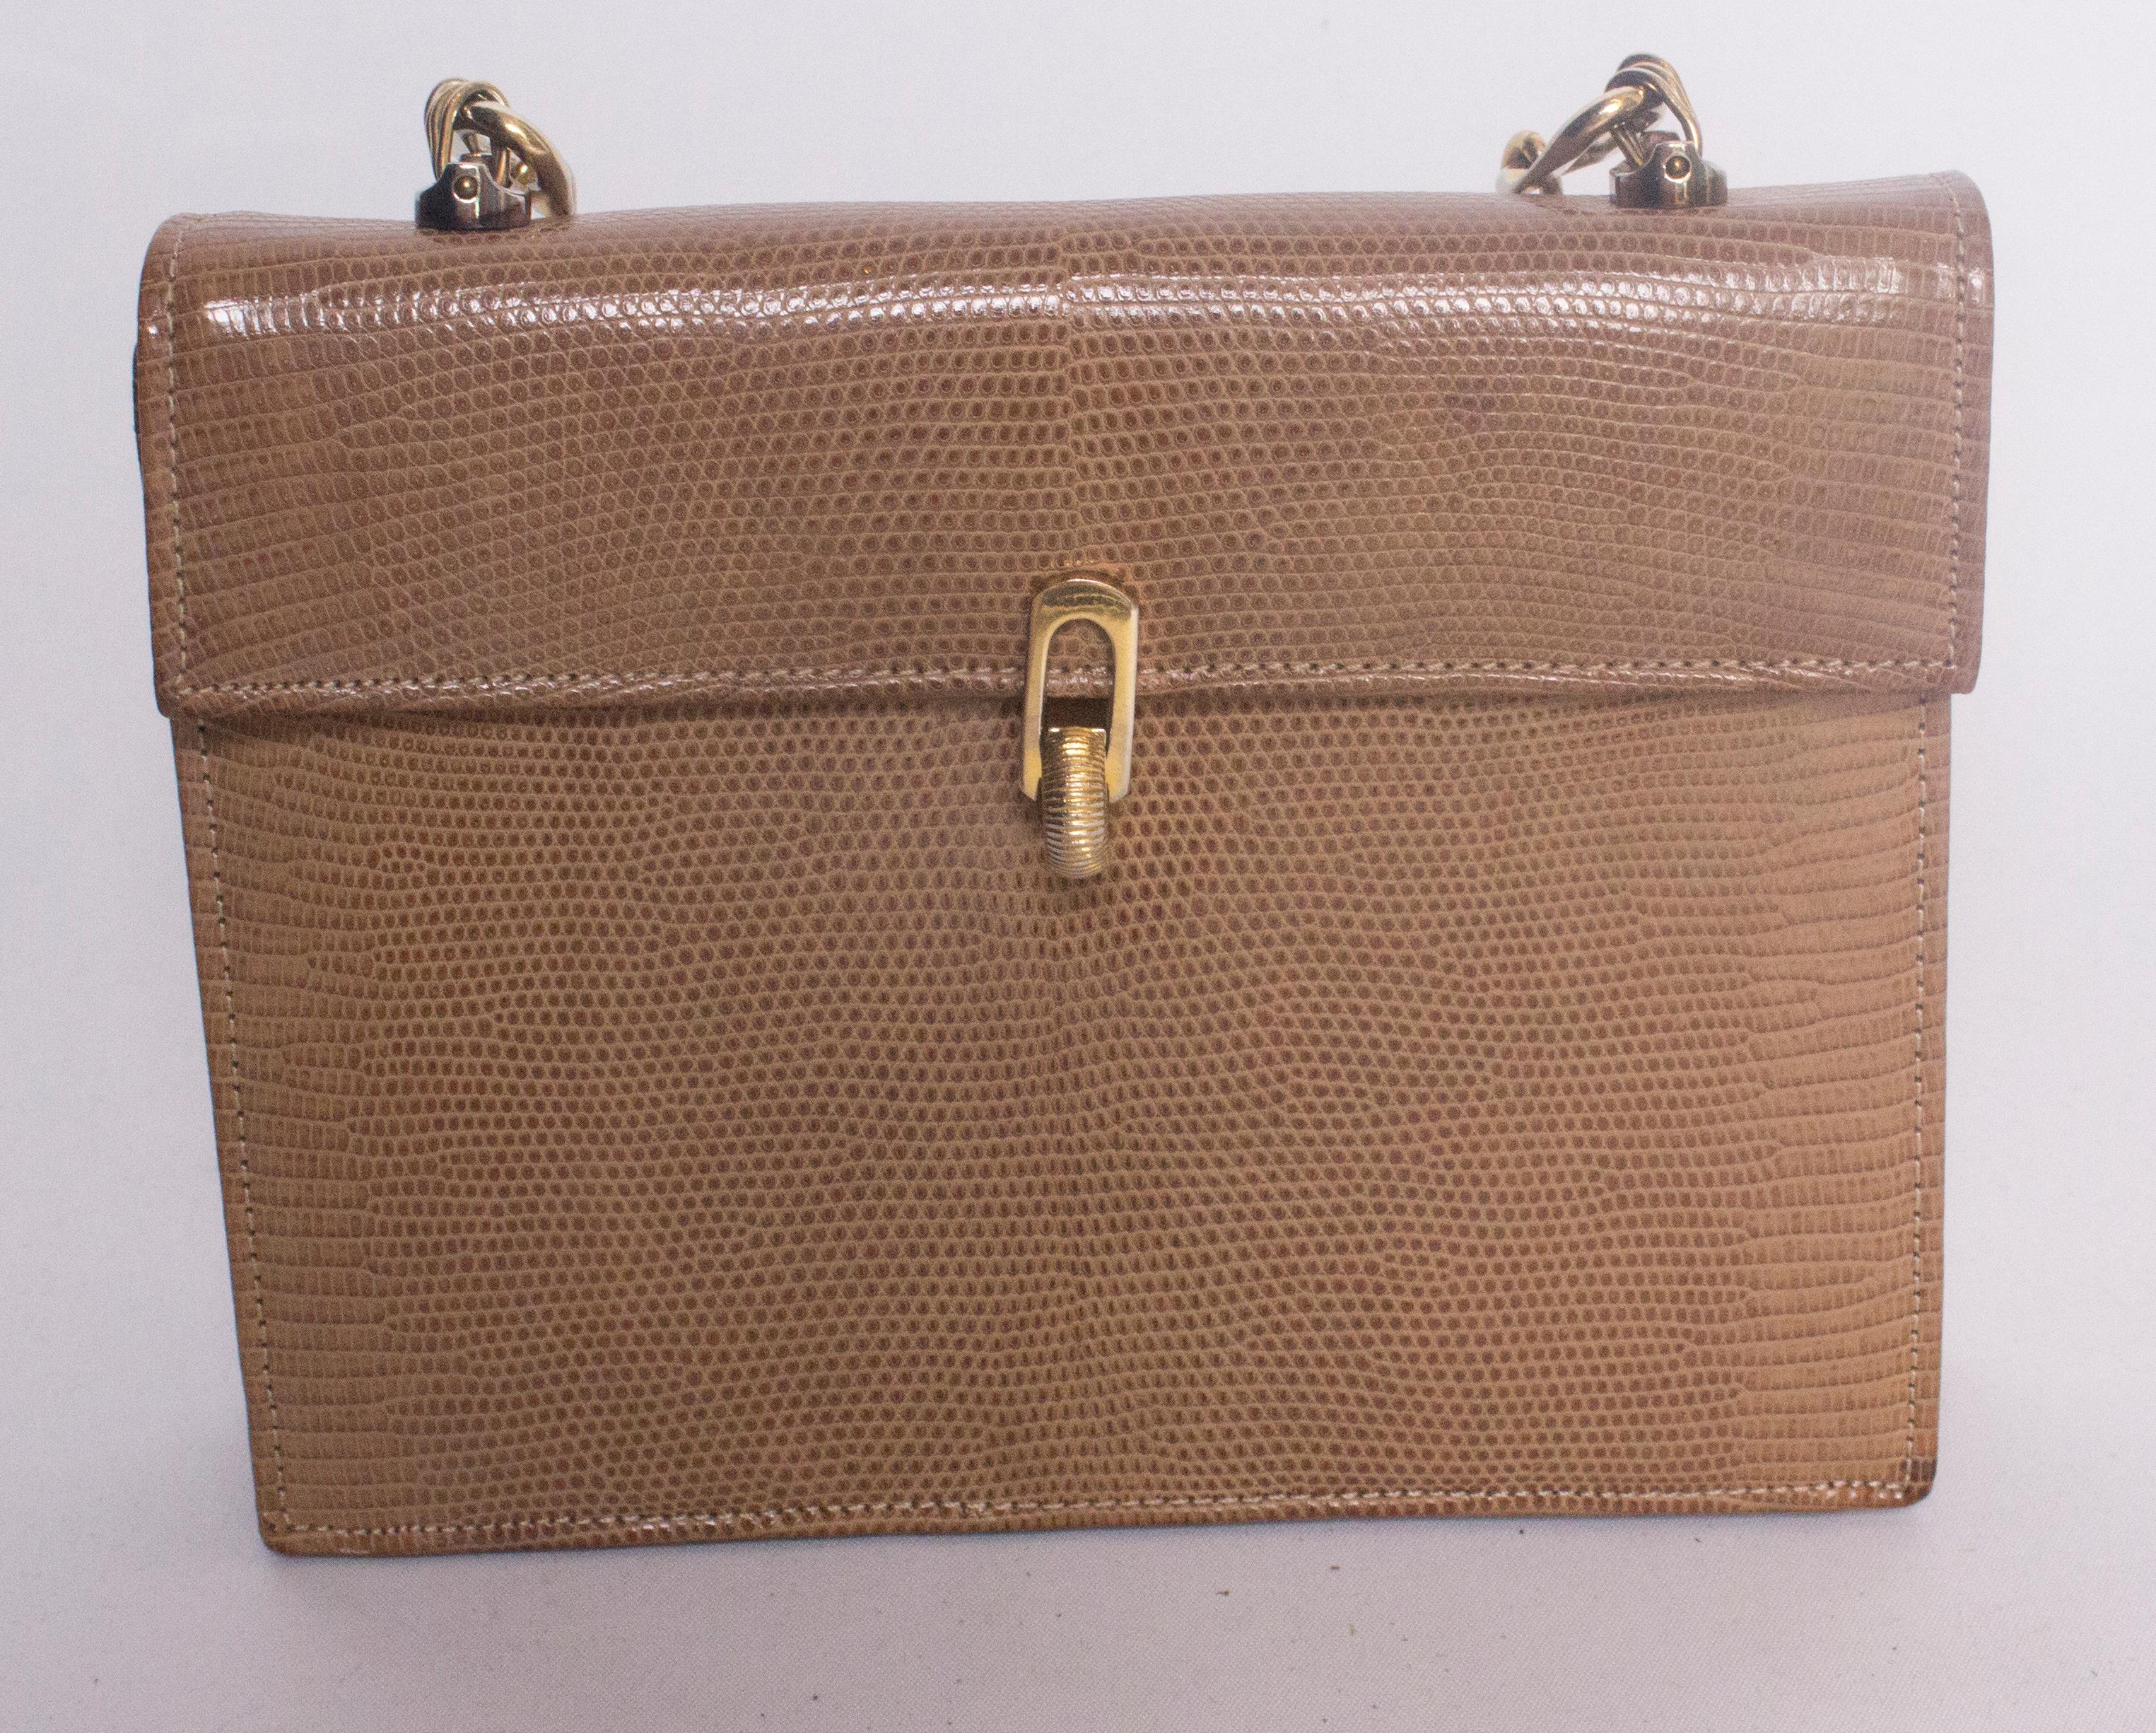 A chic vintage lizzard skin handbag with a nice heavy gold chain. The bag is biscuit coloured lizard and leather lined. It has a foldover flap with decorative catch. Internally there are two compartments, one has one zip pocket and one pouch pocket,